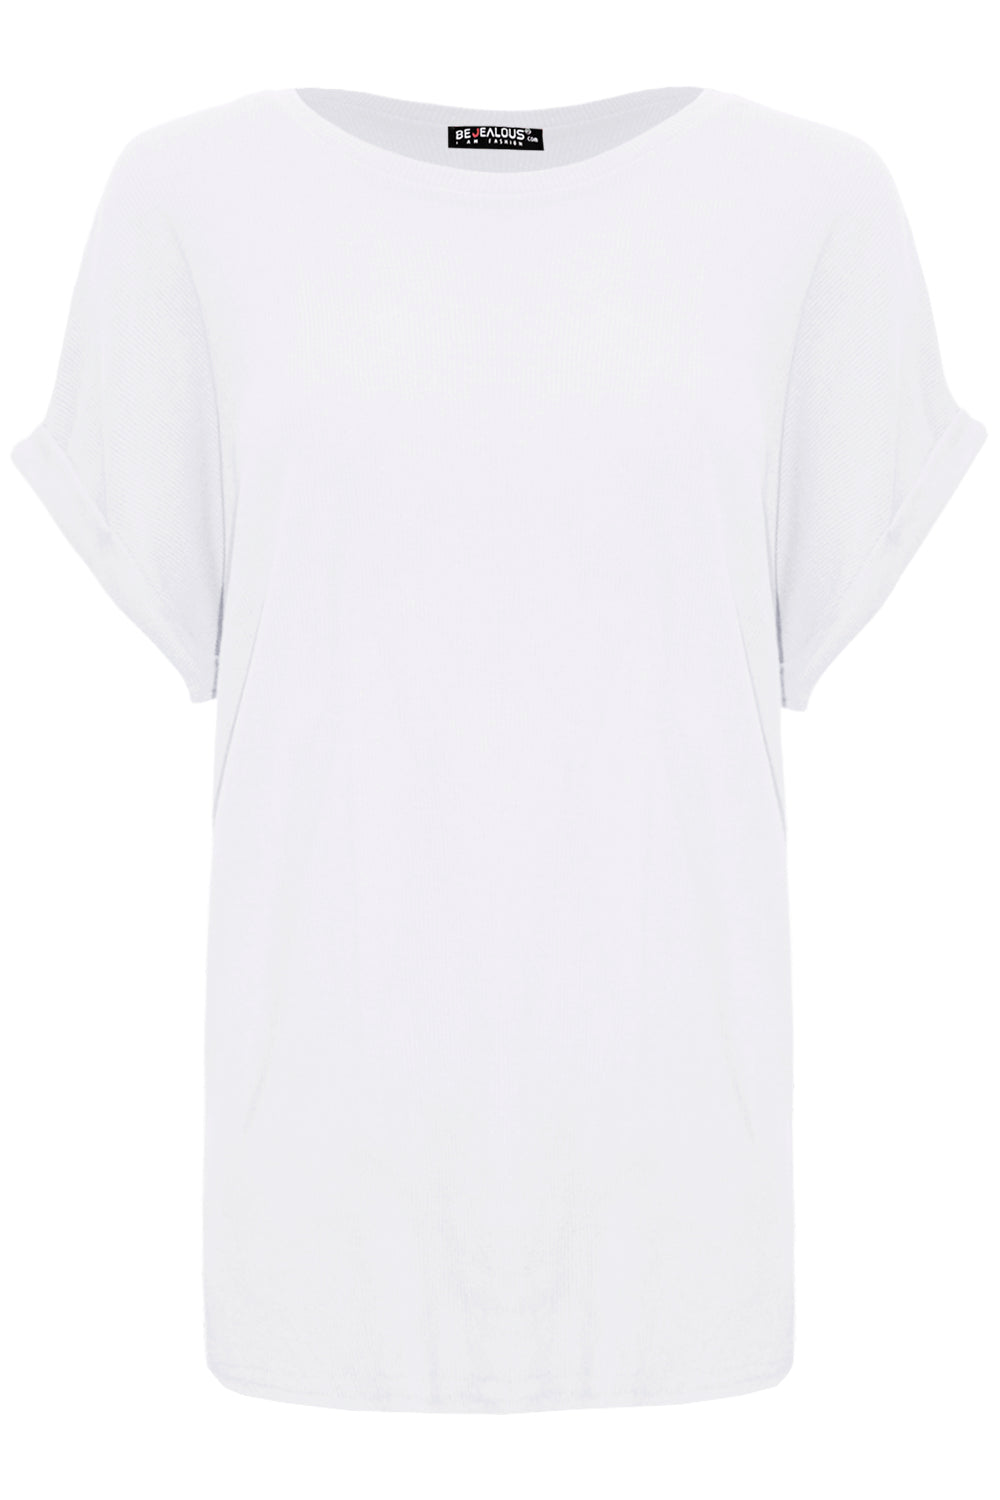 Lucy Plain Baggy Casual Basic T Shirt Top